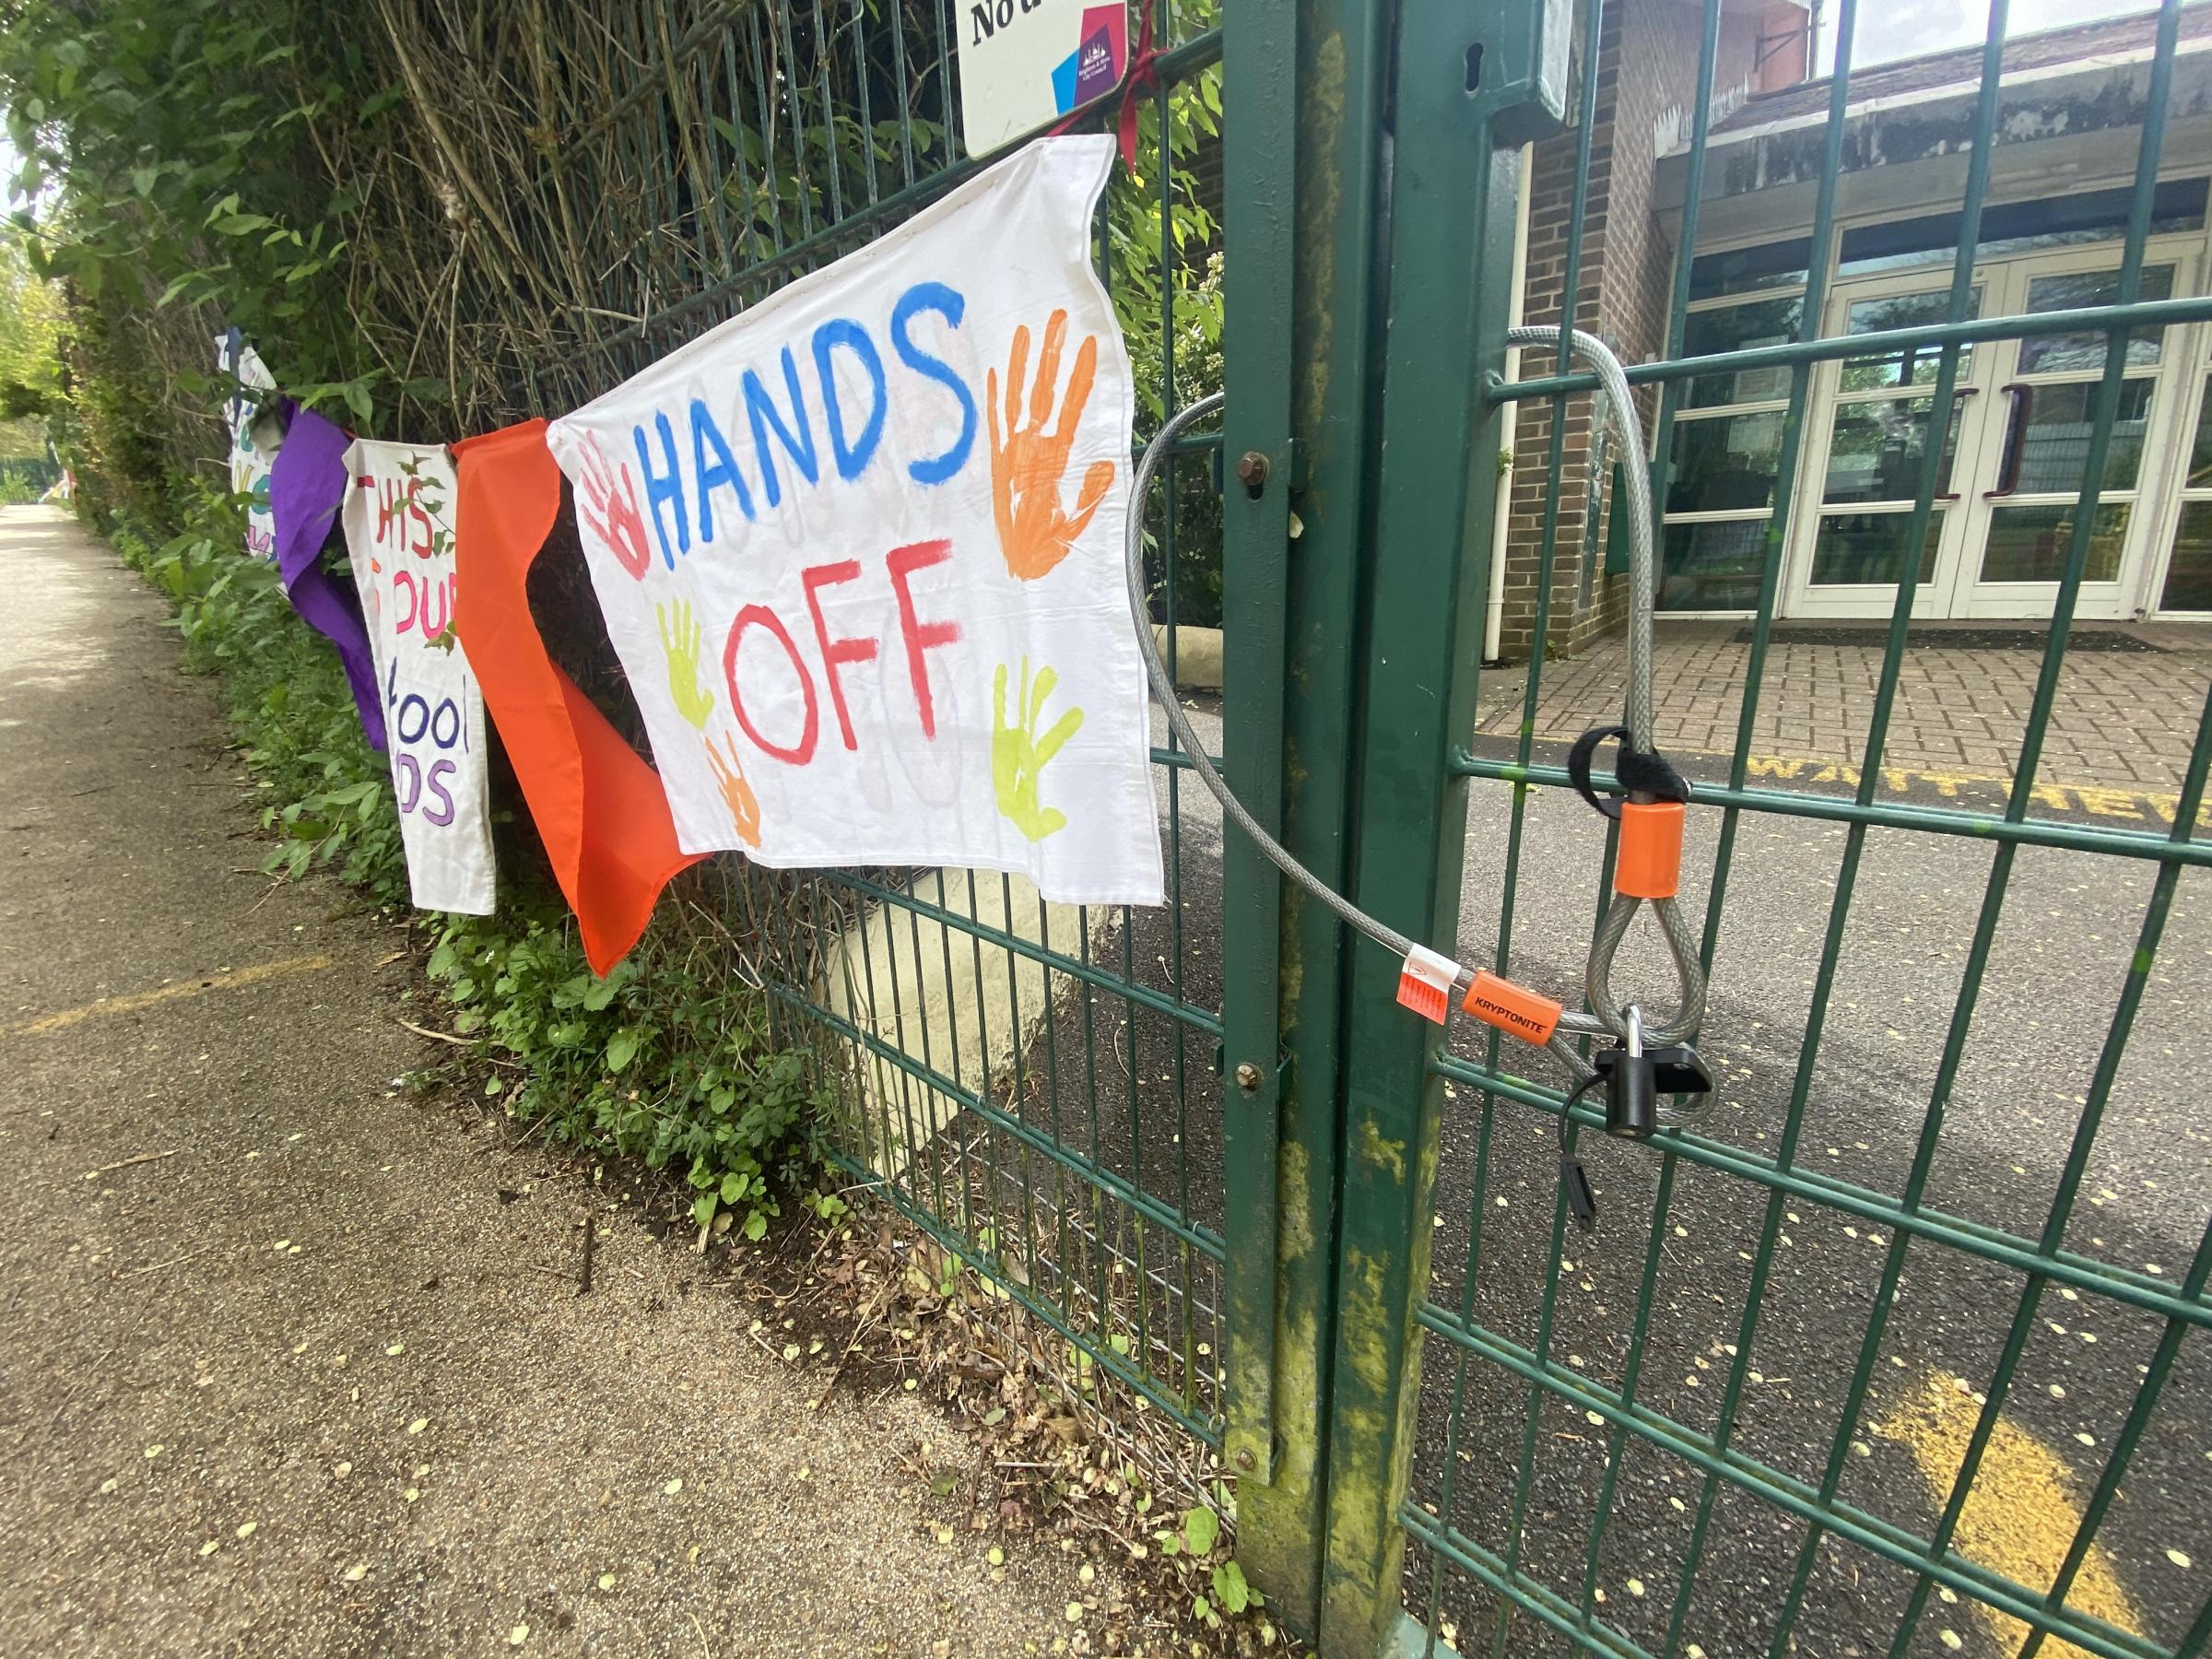 Parents and campaigners block the gates of Moulsecoomb Primary School